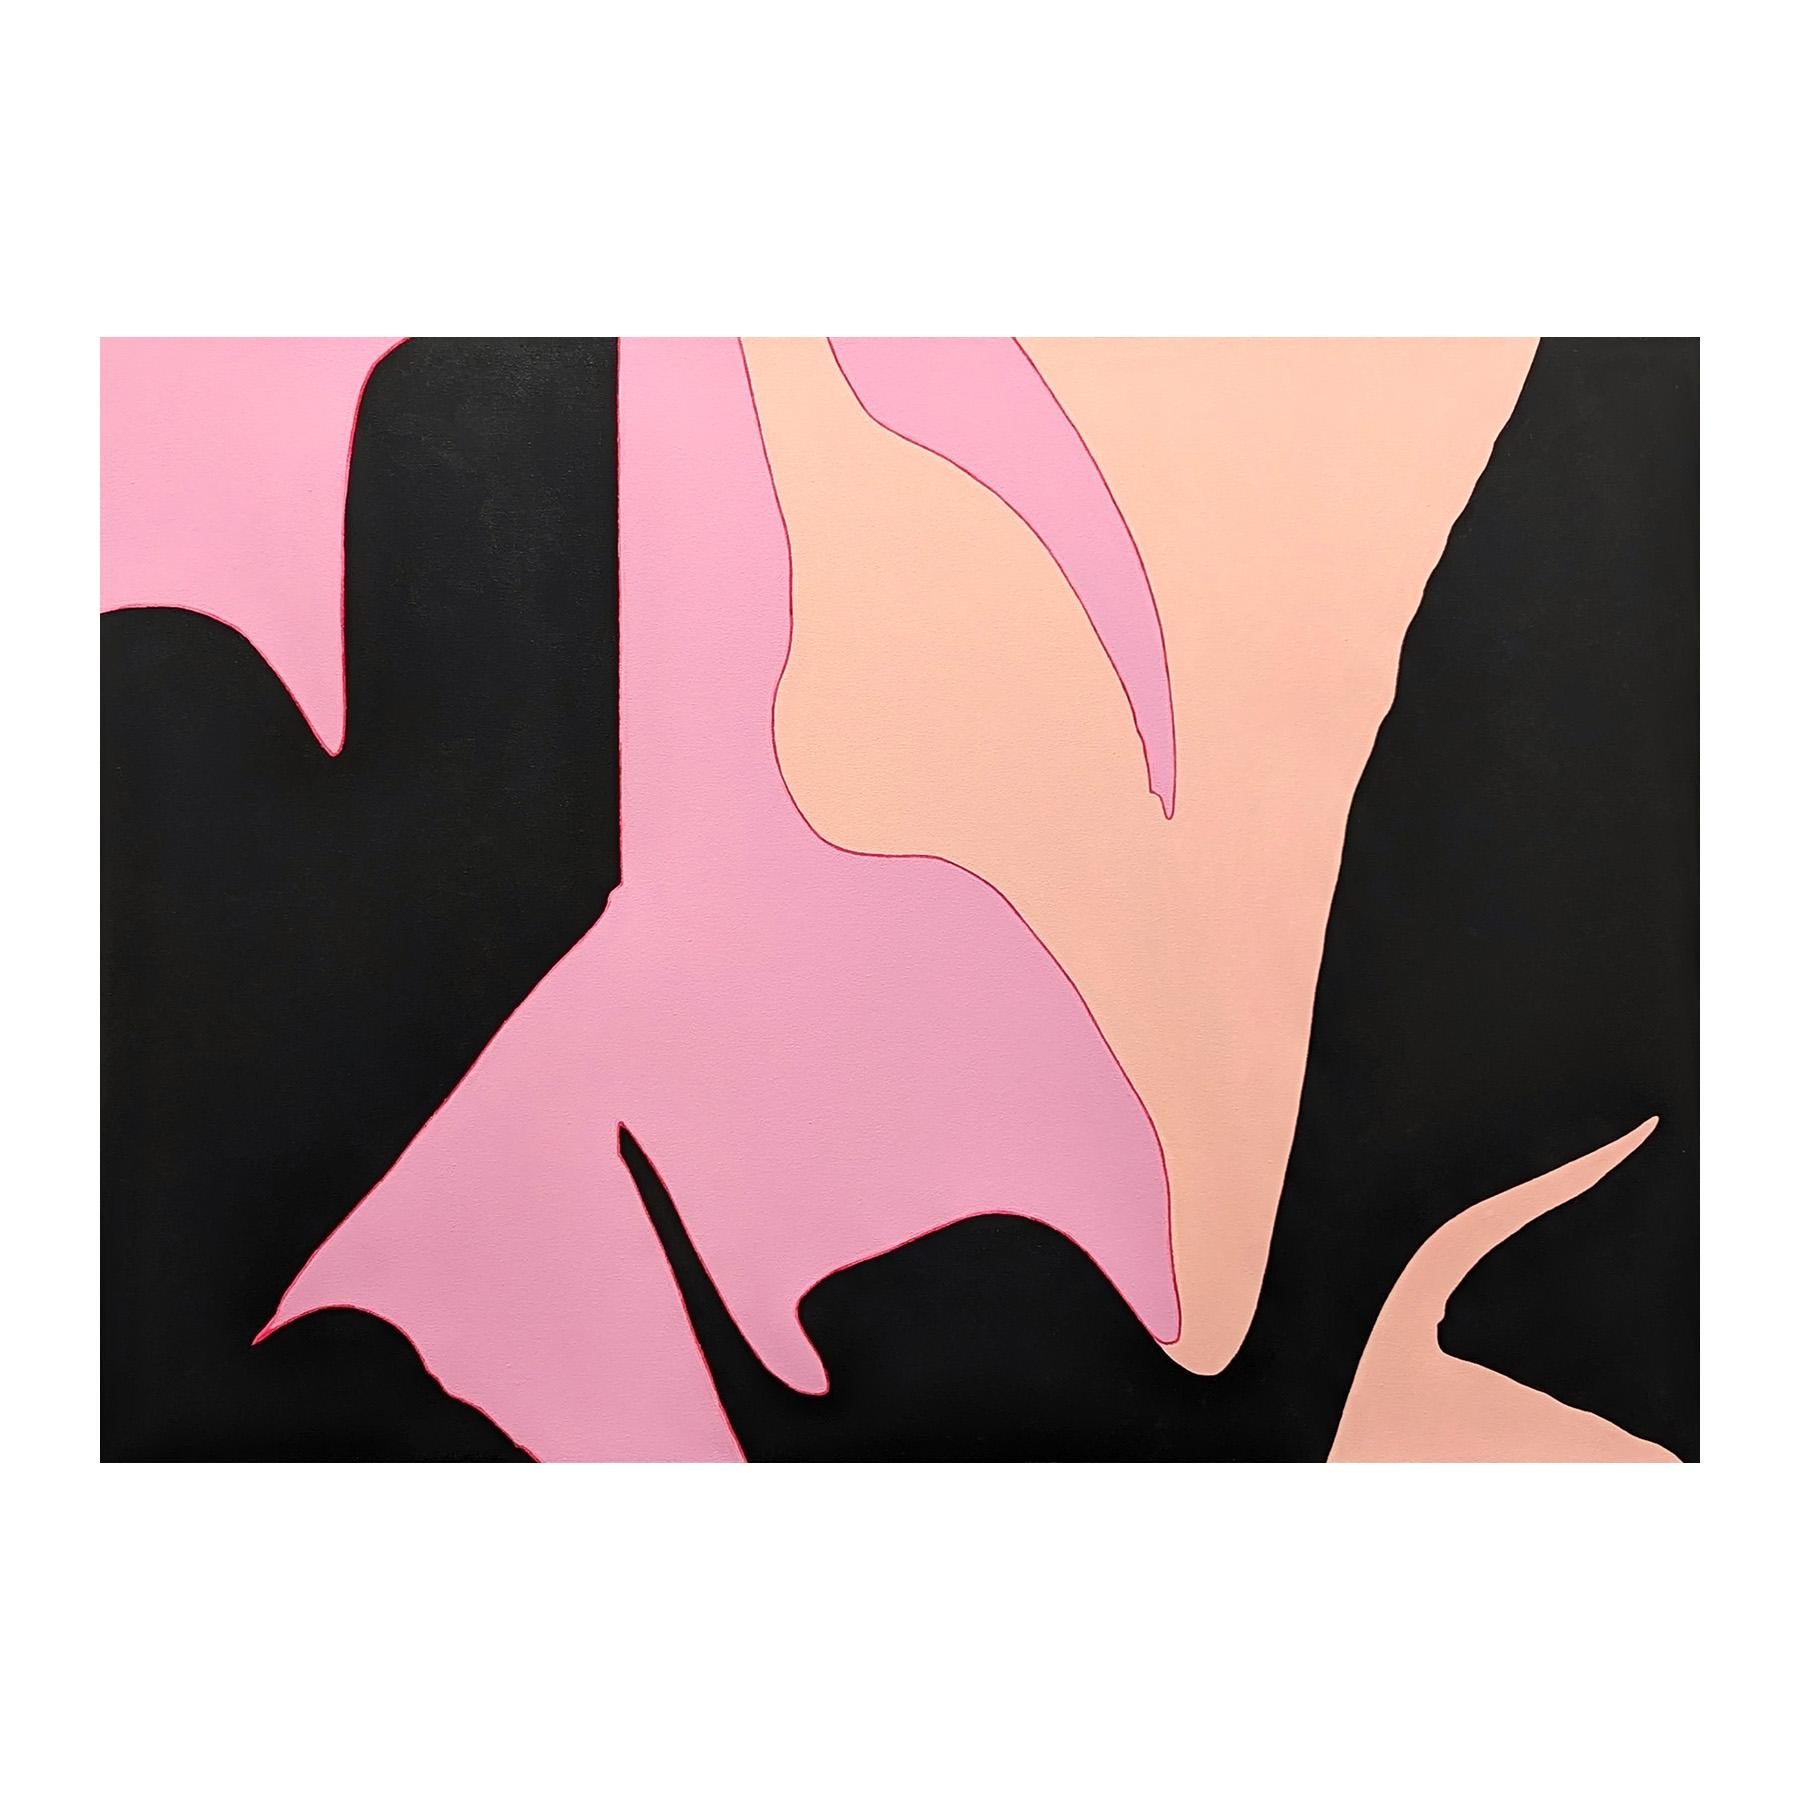 Contemporary abstract painting by local Houston artist Emmanuel Araujo. The work features swirling bursts of color in pink and black. Signed, titled, and dated on the reverse. Currently unframed, but options are available. 

Artist Biography: